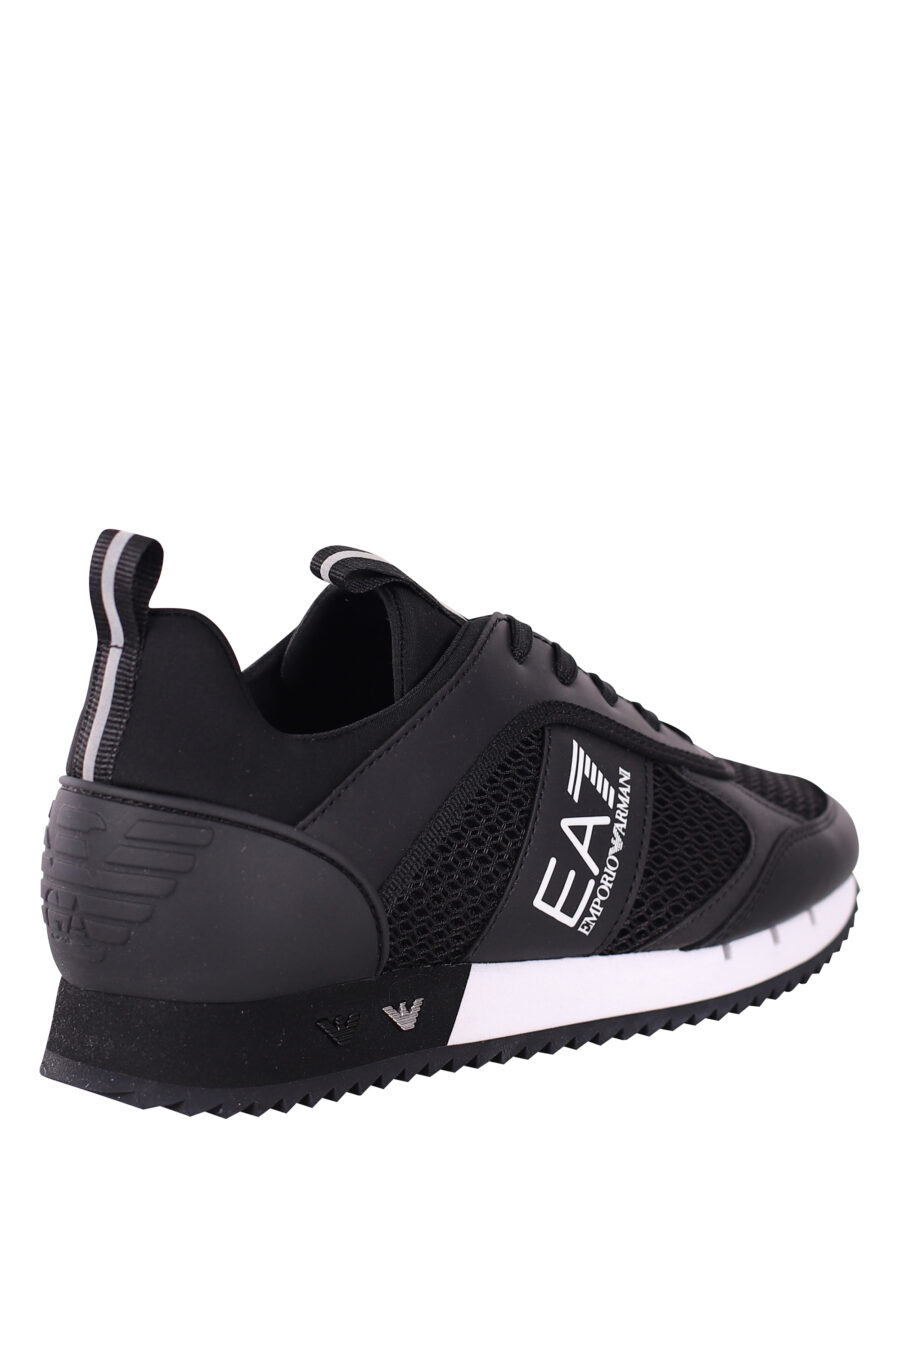 Breathable black trainers with white "lux identity" logo and two-tone sole - IMG 5771